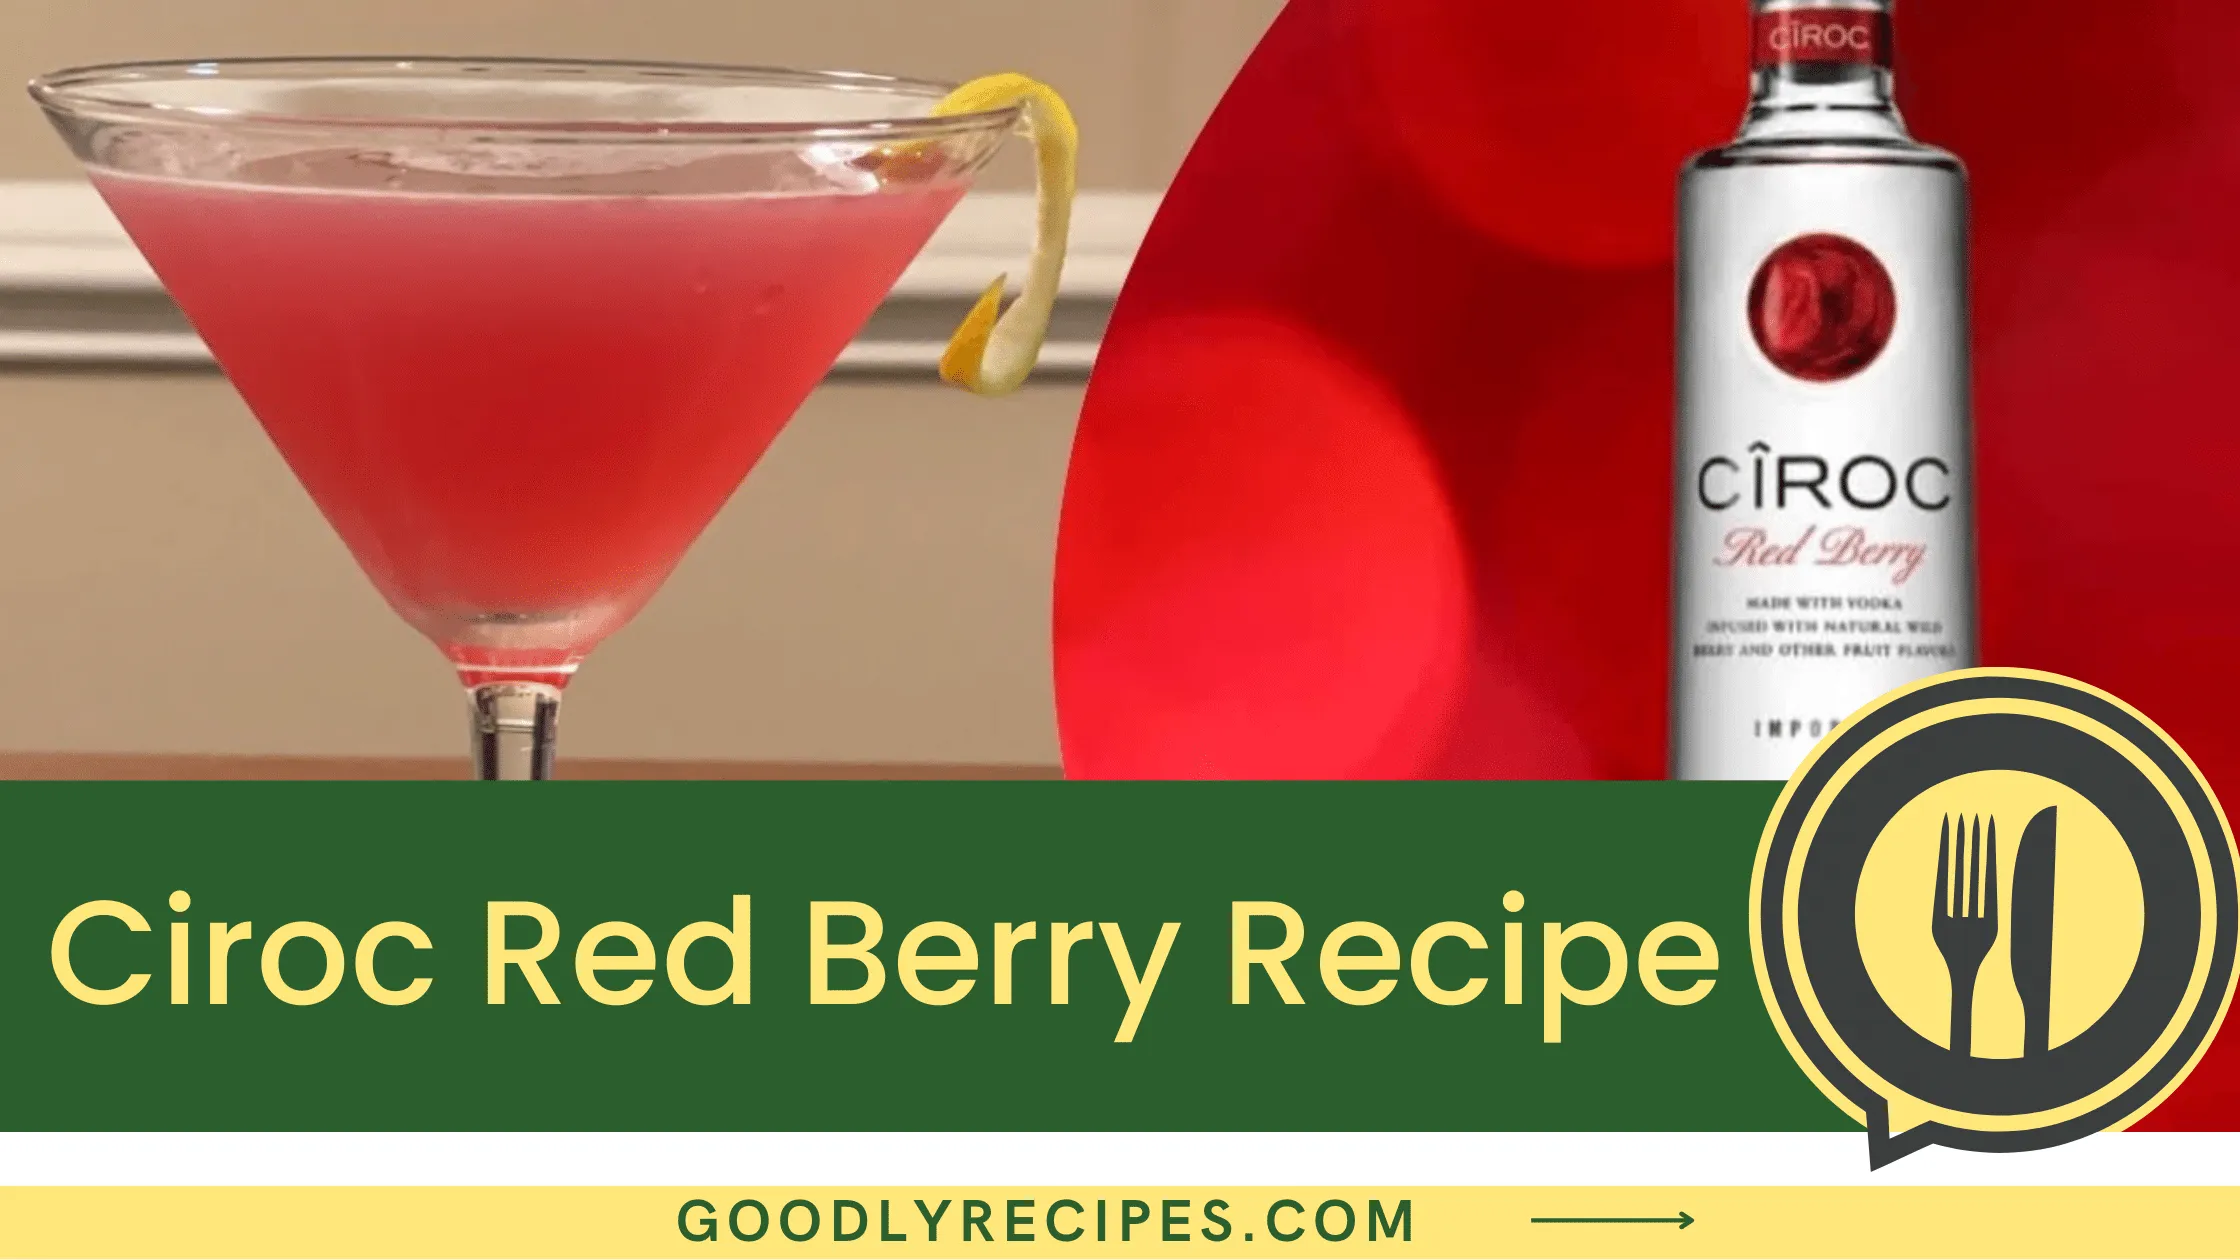 What Is Ciroc Red Berry Rice?